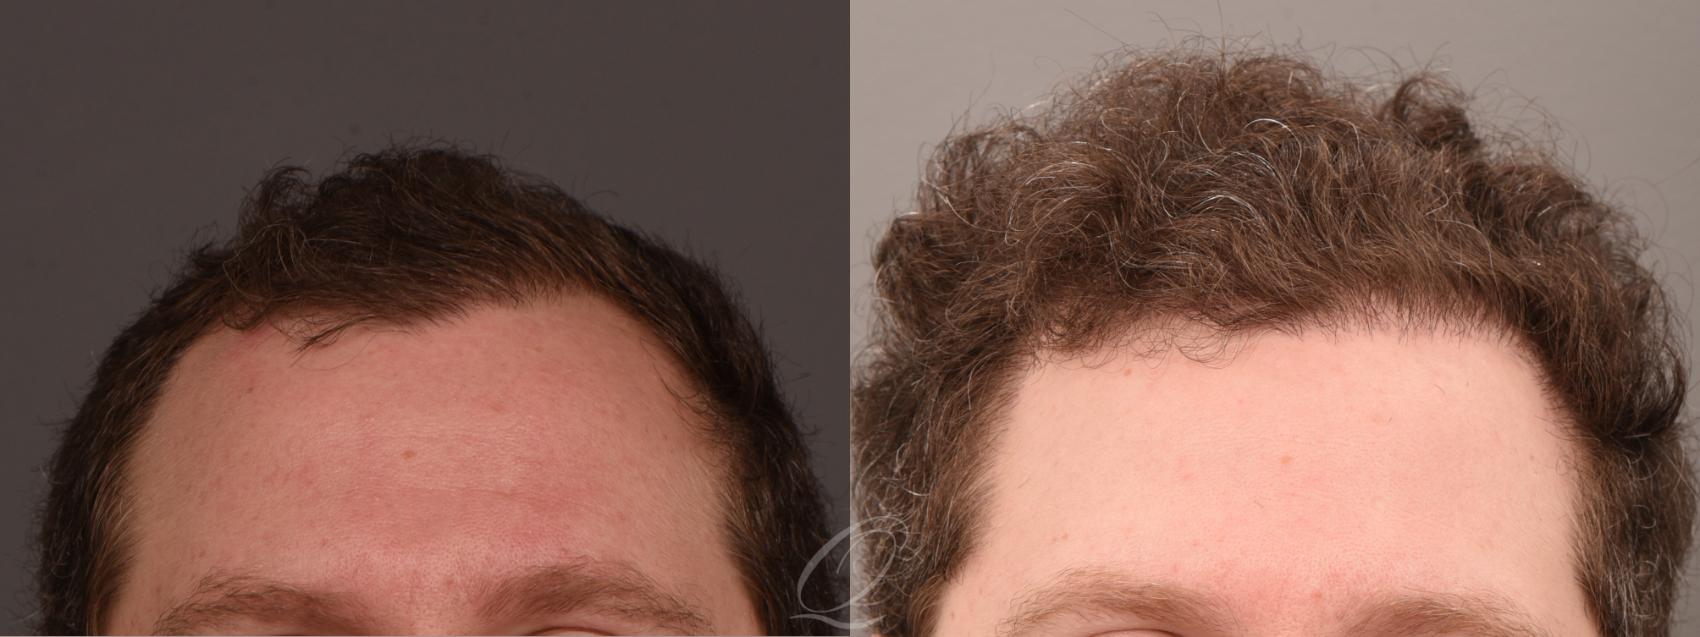 FUT Case 1001712 Before & After Front | Serving Rochester, Syracuse & Buffalo, NY | Quatela Center for Plastic Surgery